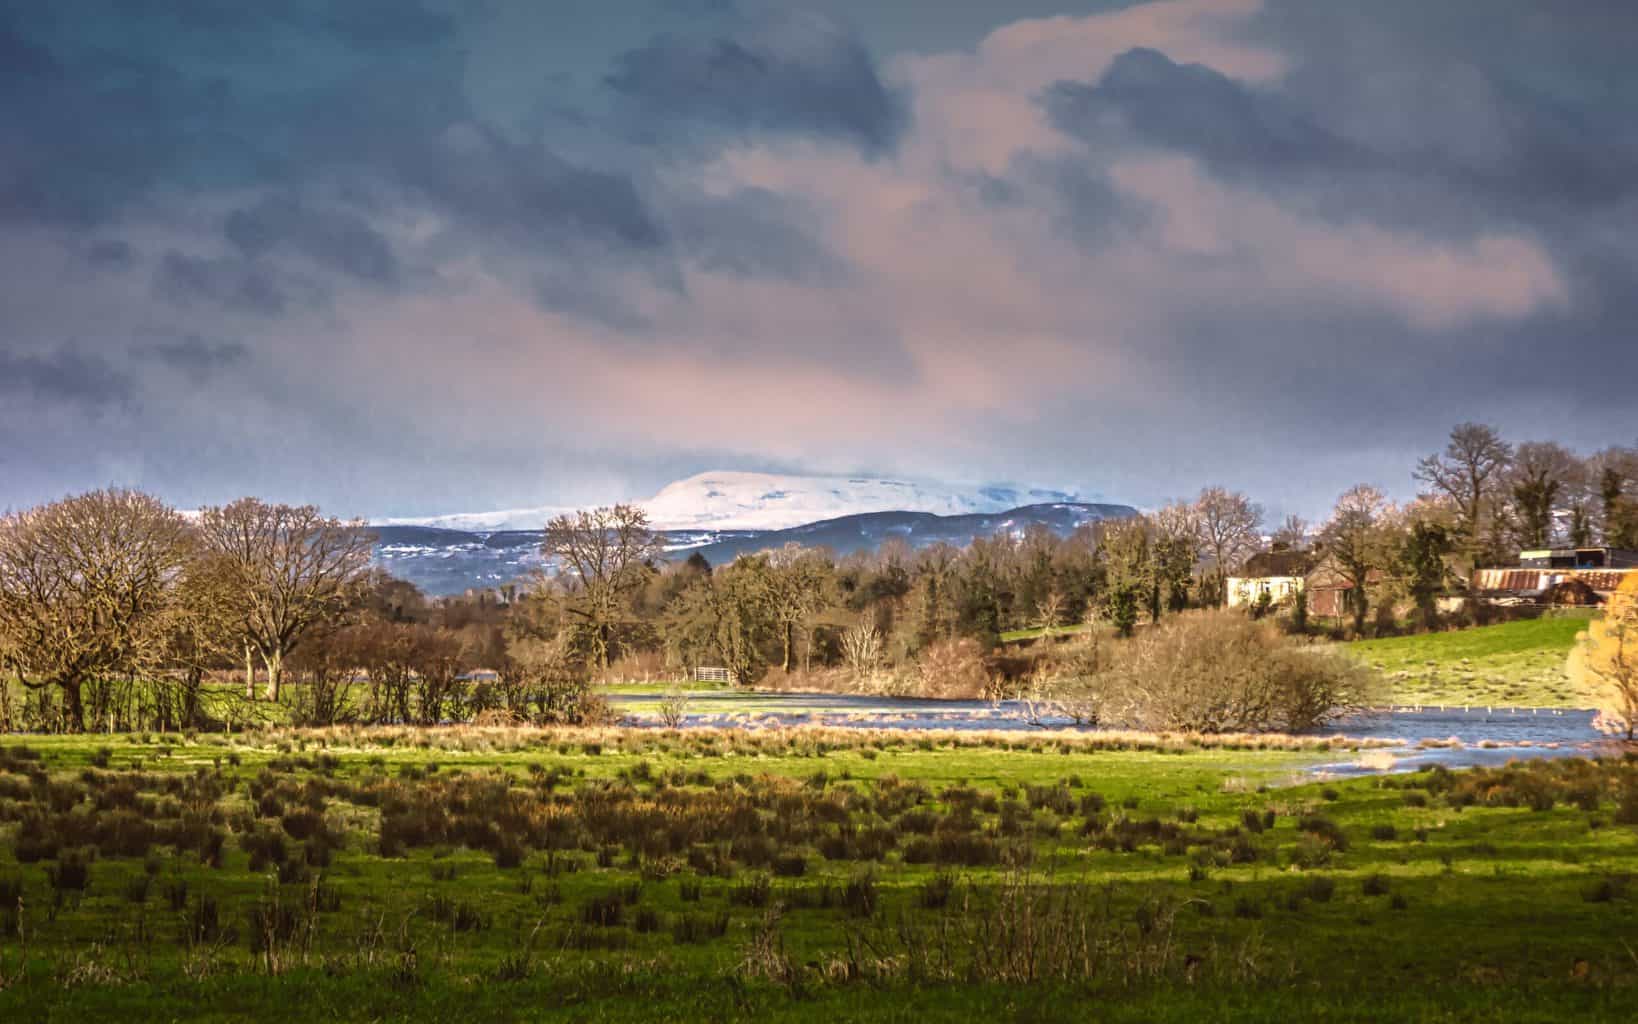 The snow-capped Cuilcagh Mountains seen from Belle Isle Estate in County Fermanagh after a late winter/early spring storm.